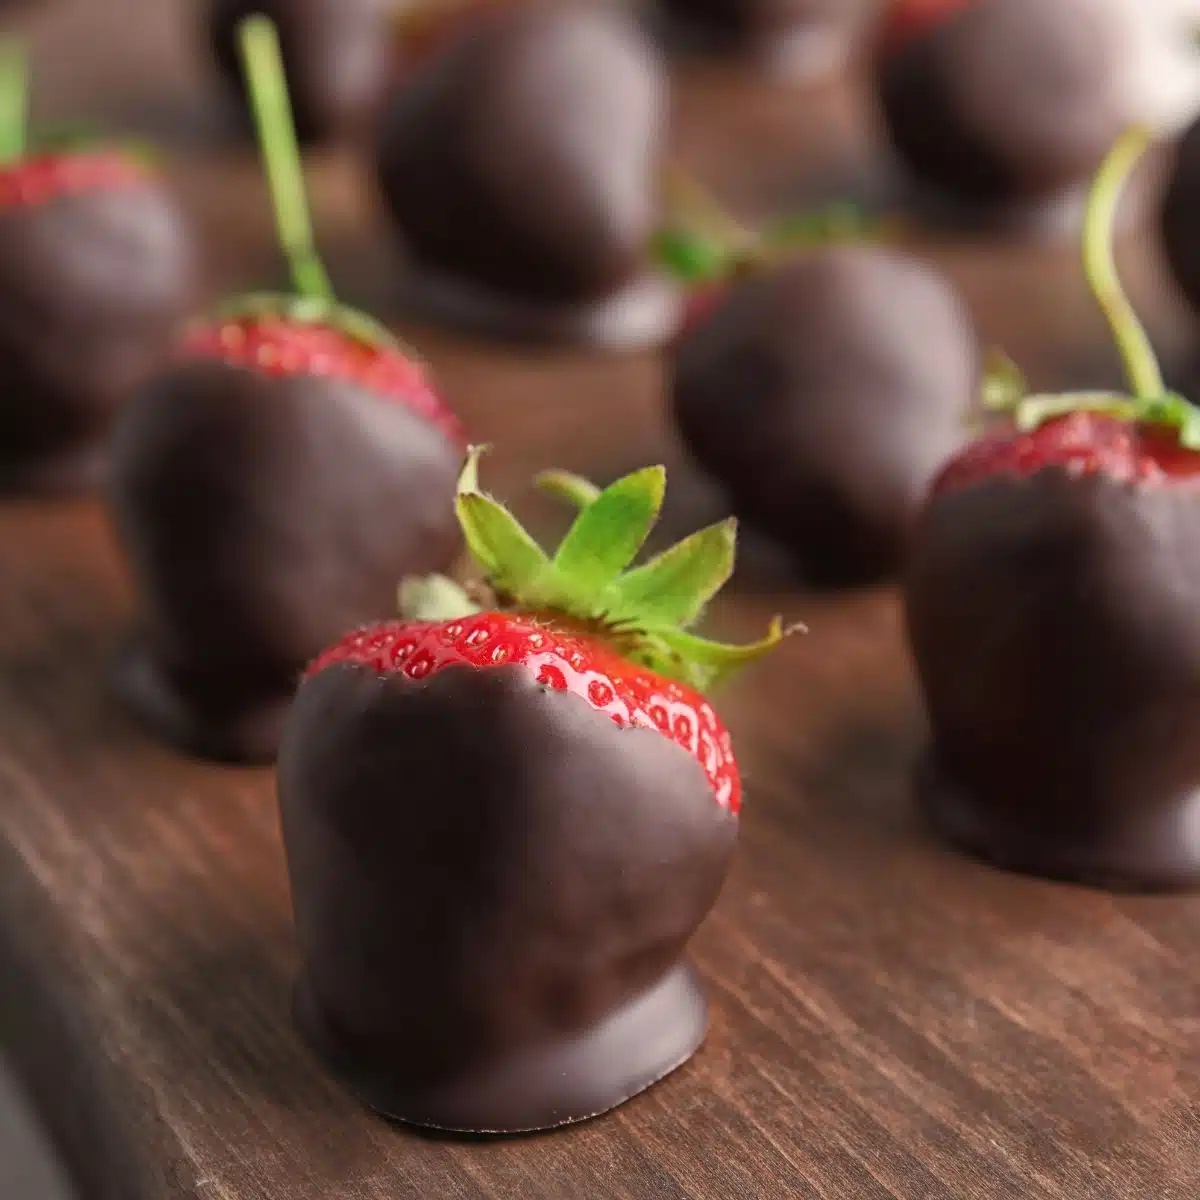 Chocolate dipped strawberries on a cutting board.